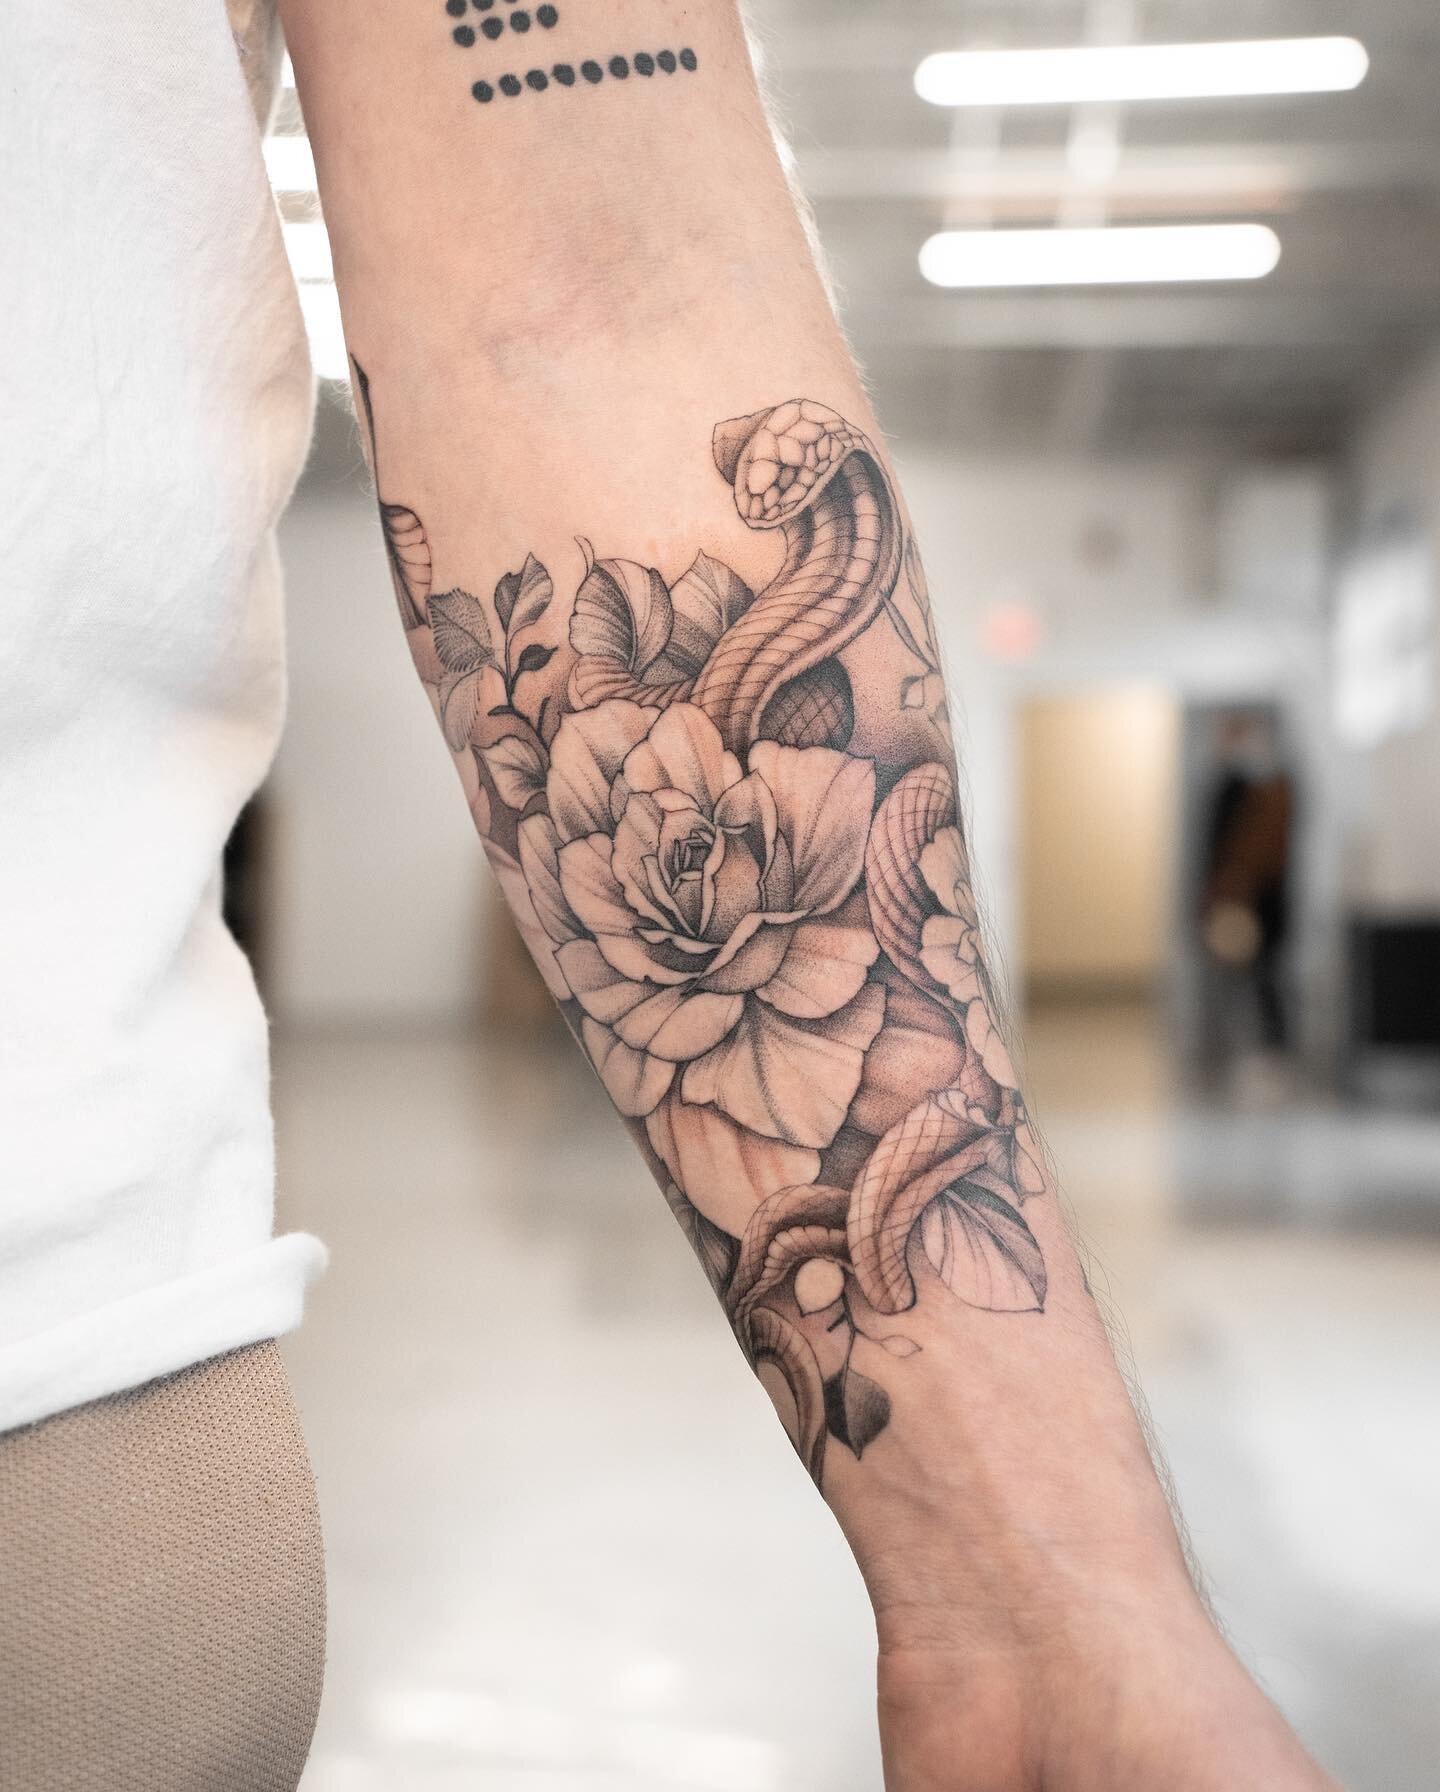 King cobra and floral half sleeve for Daniel of @apt3409. 

.

All likes, saves, comments, and shares are appreciated :). 

.

lornetattoos.ca for booking. 

.

#tuesdaytoptags #floraltattoo 
#torontoink #torontotattoo #torontotattooartist #torontoin